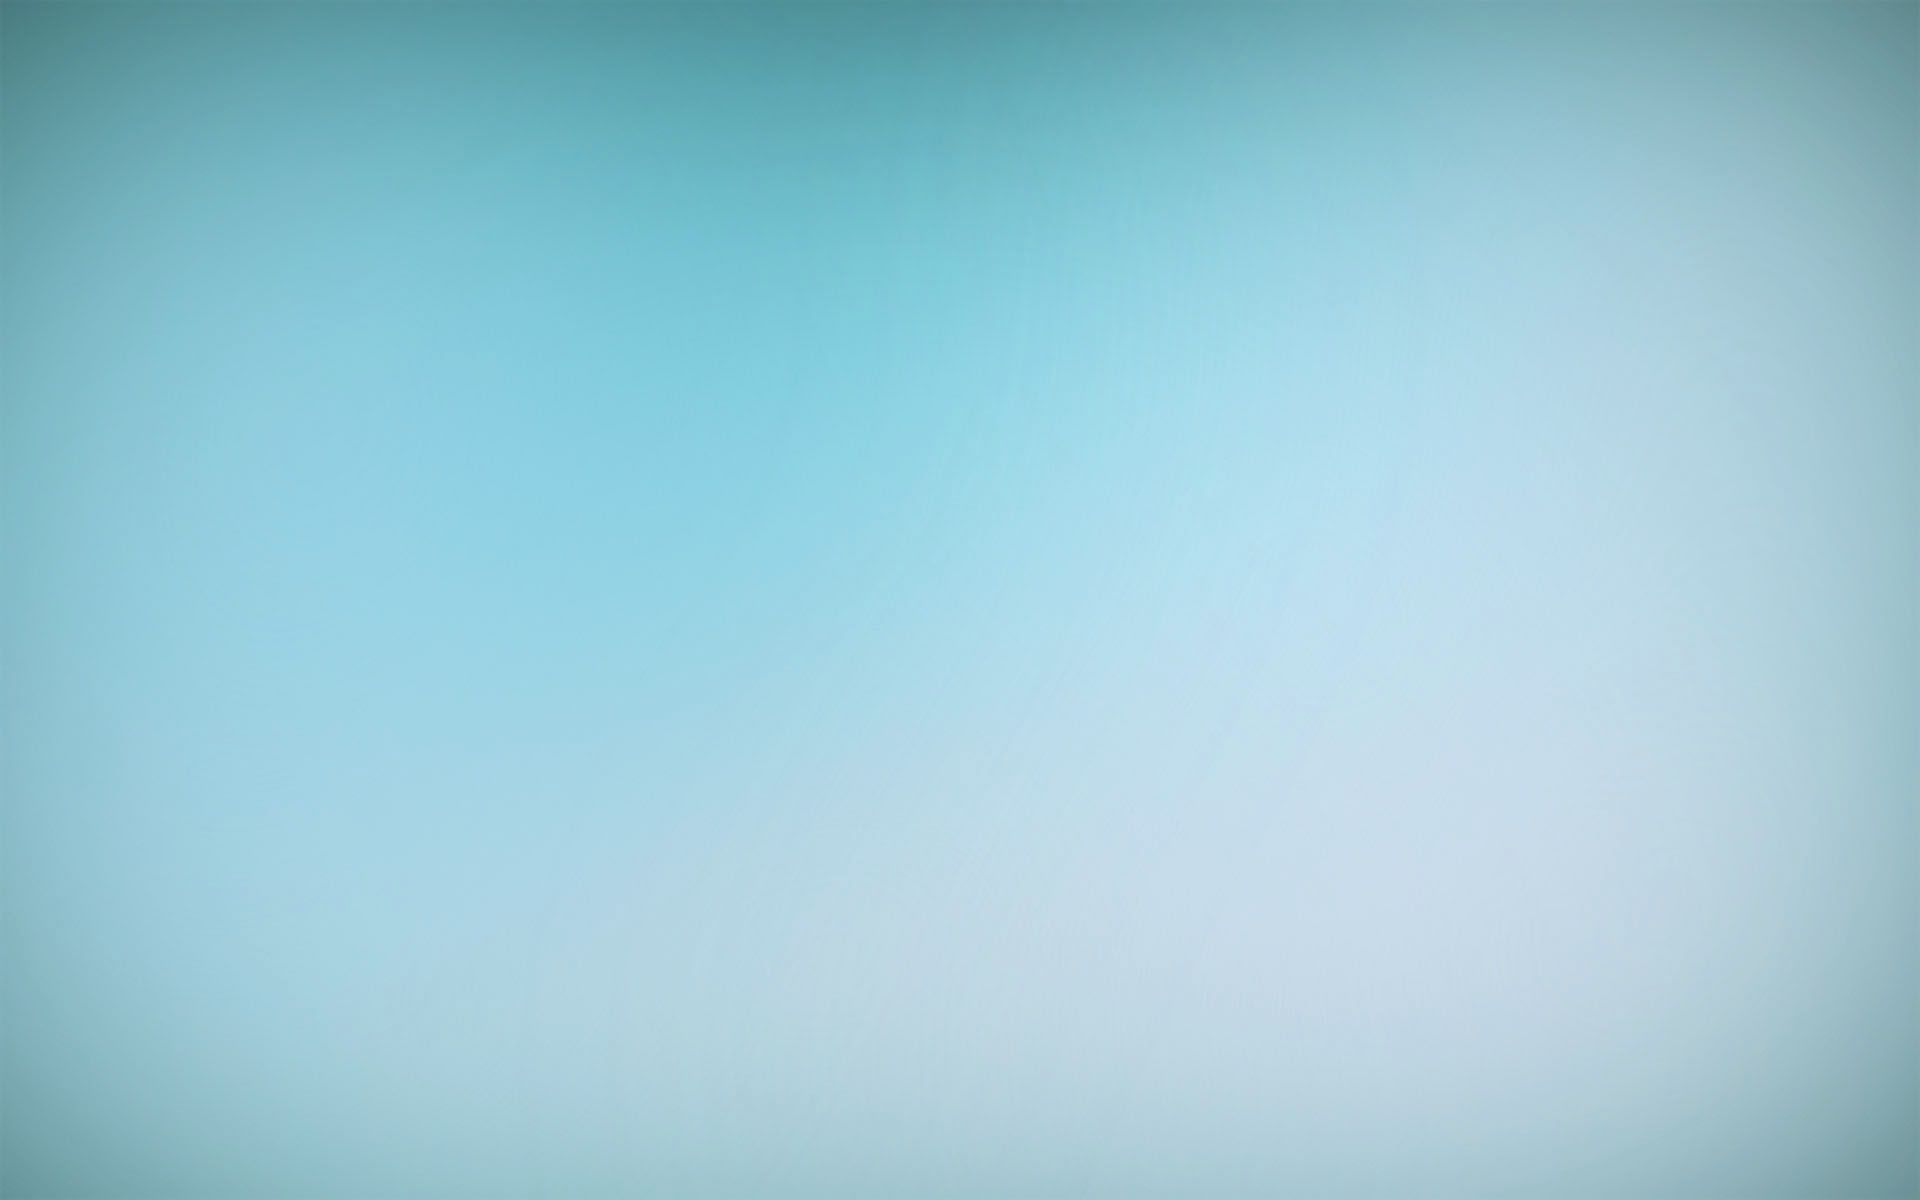 Business Clean Cyan/Blue - Cool Twitter Backgrounds